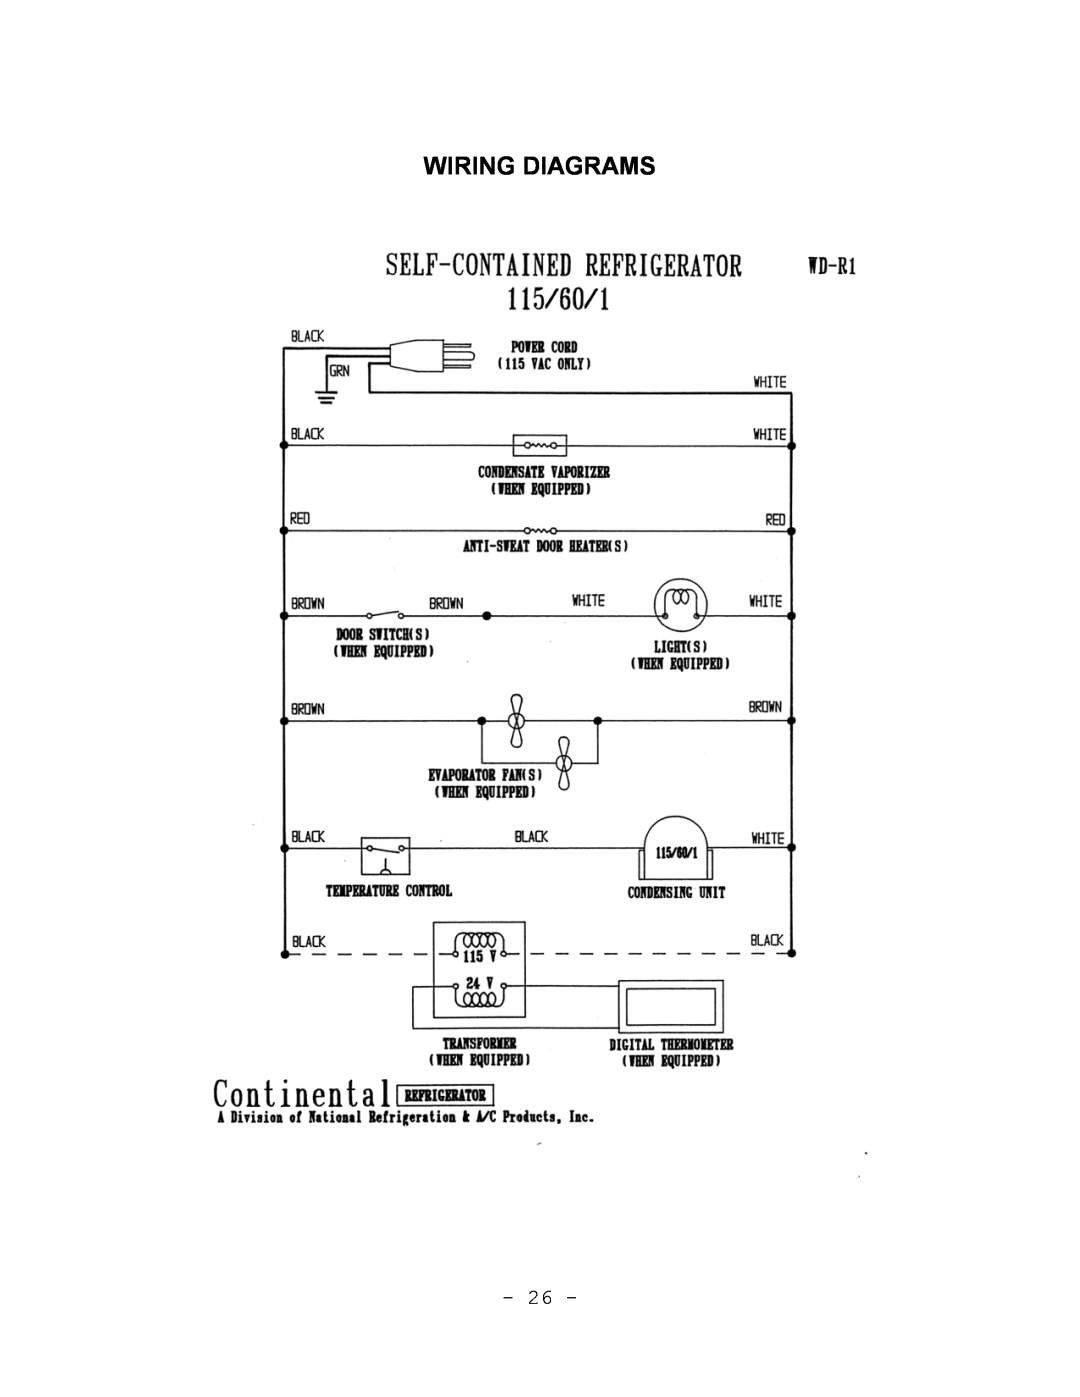 Continental Refrigerator Refrigerators and Freezers instruction manual Wiring Diagrams 